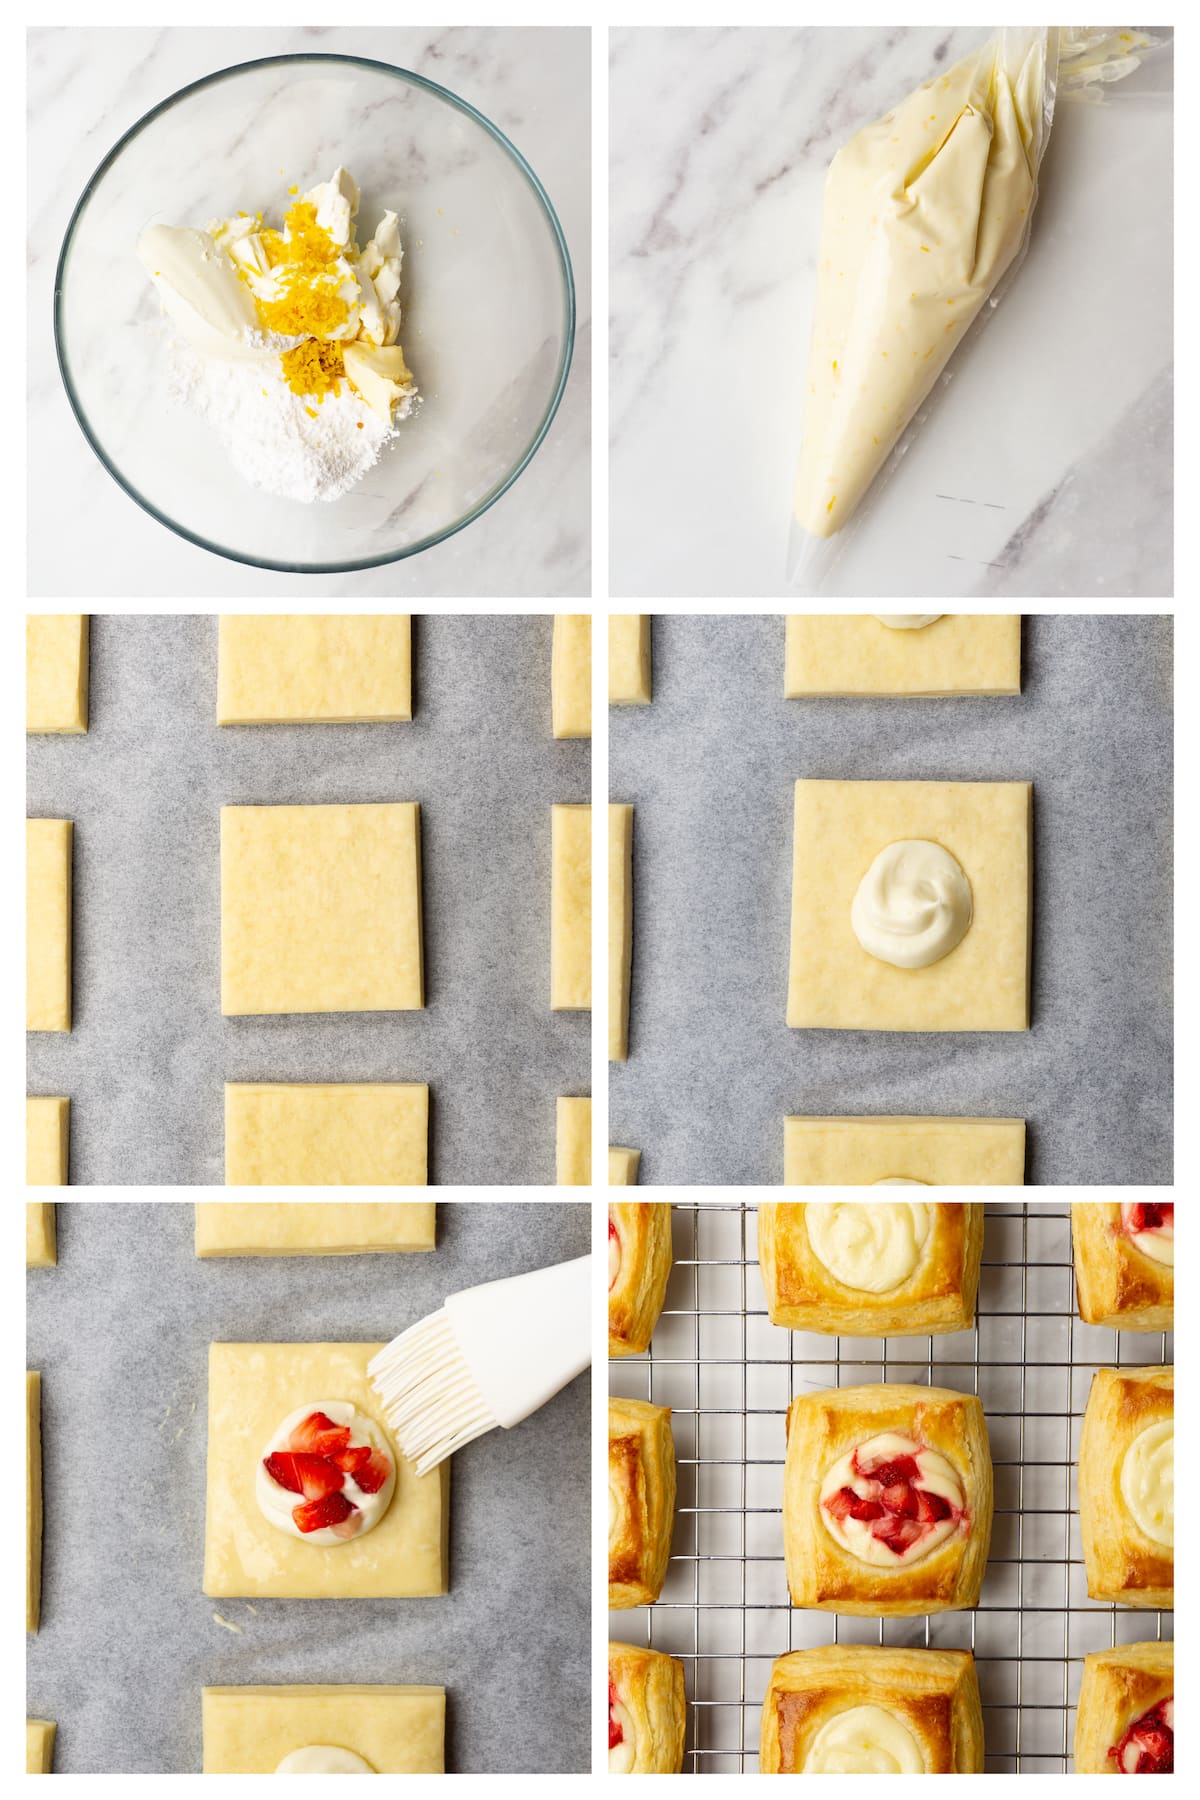 The collage image shows six steps to make Danishes with cream cheese and lemon zest filling and fresh strawberry topping.